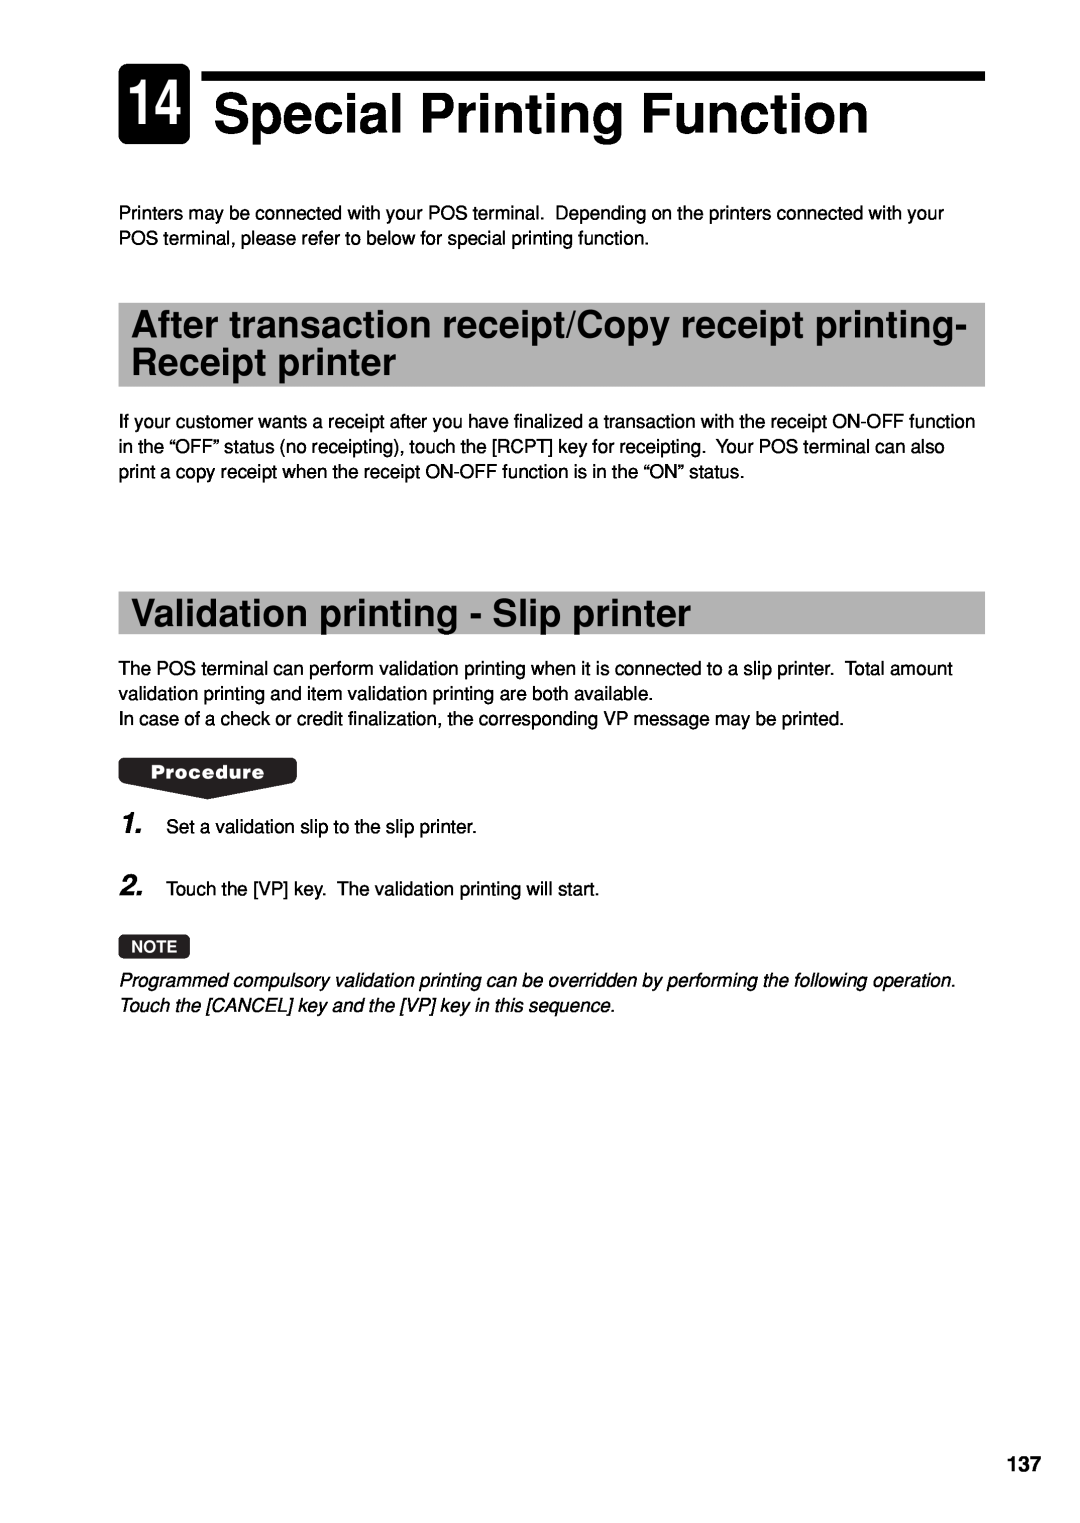 Sharp UP-X300 14Special Printing Function, After transaction receipt/Copy receipt printing, Receipt printer 